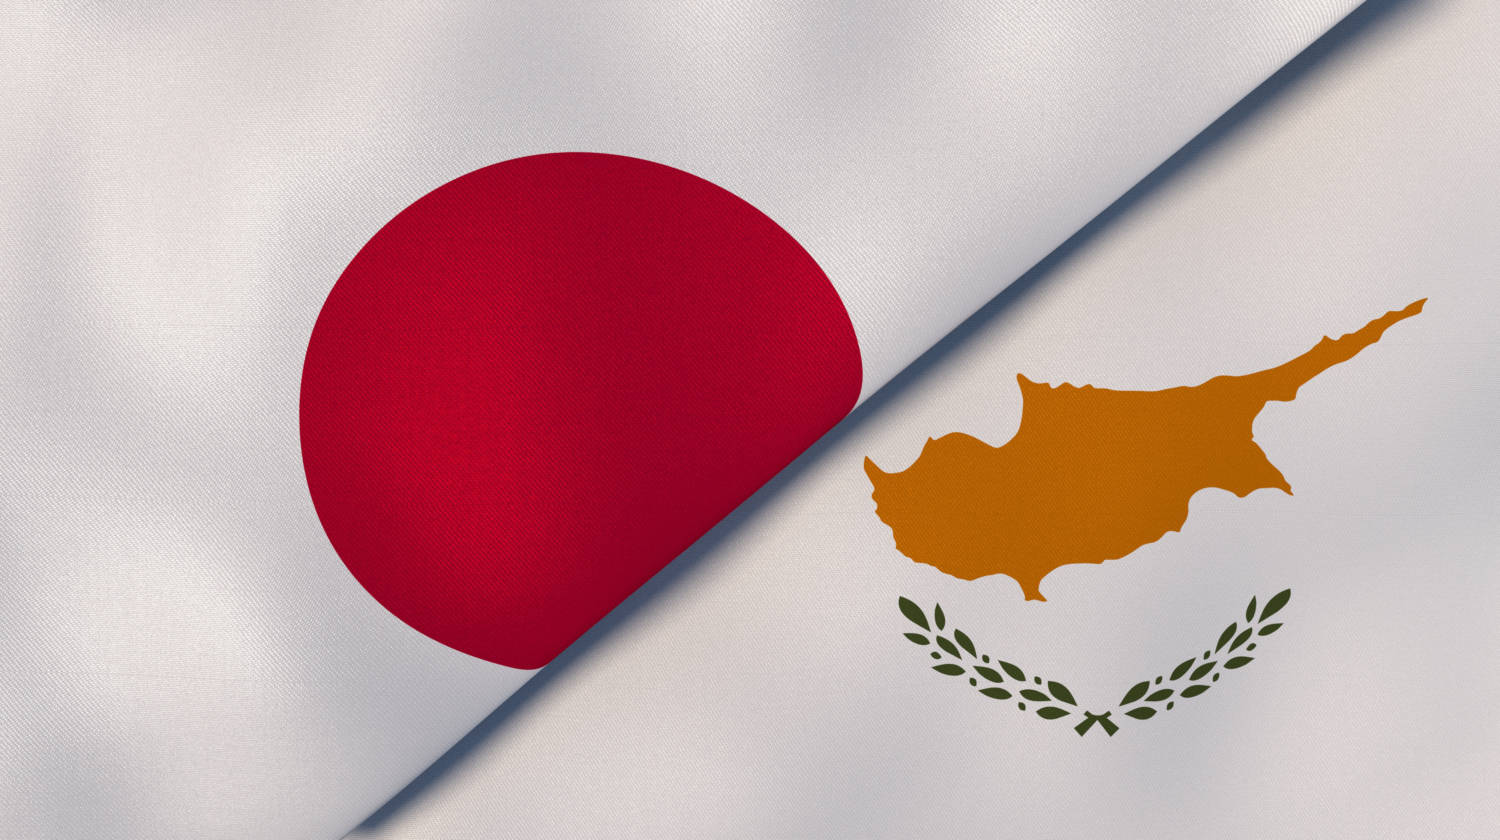 The Flags Of Japan And Cyprus. News, Reportage, Business Background. 3d Illustration